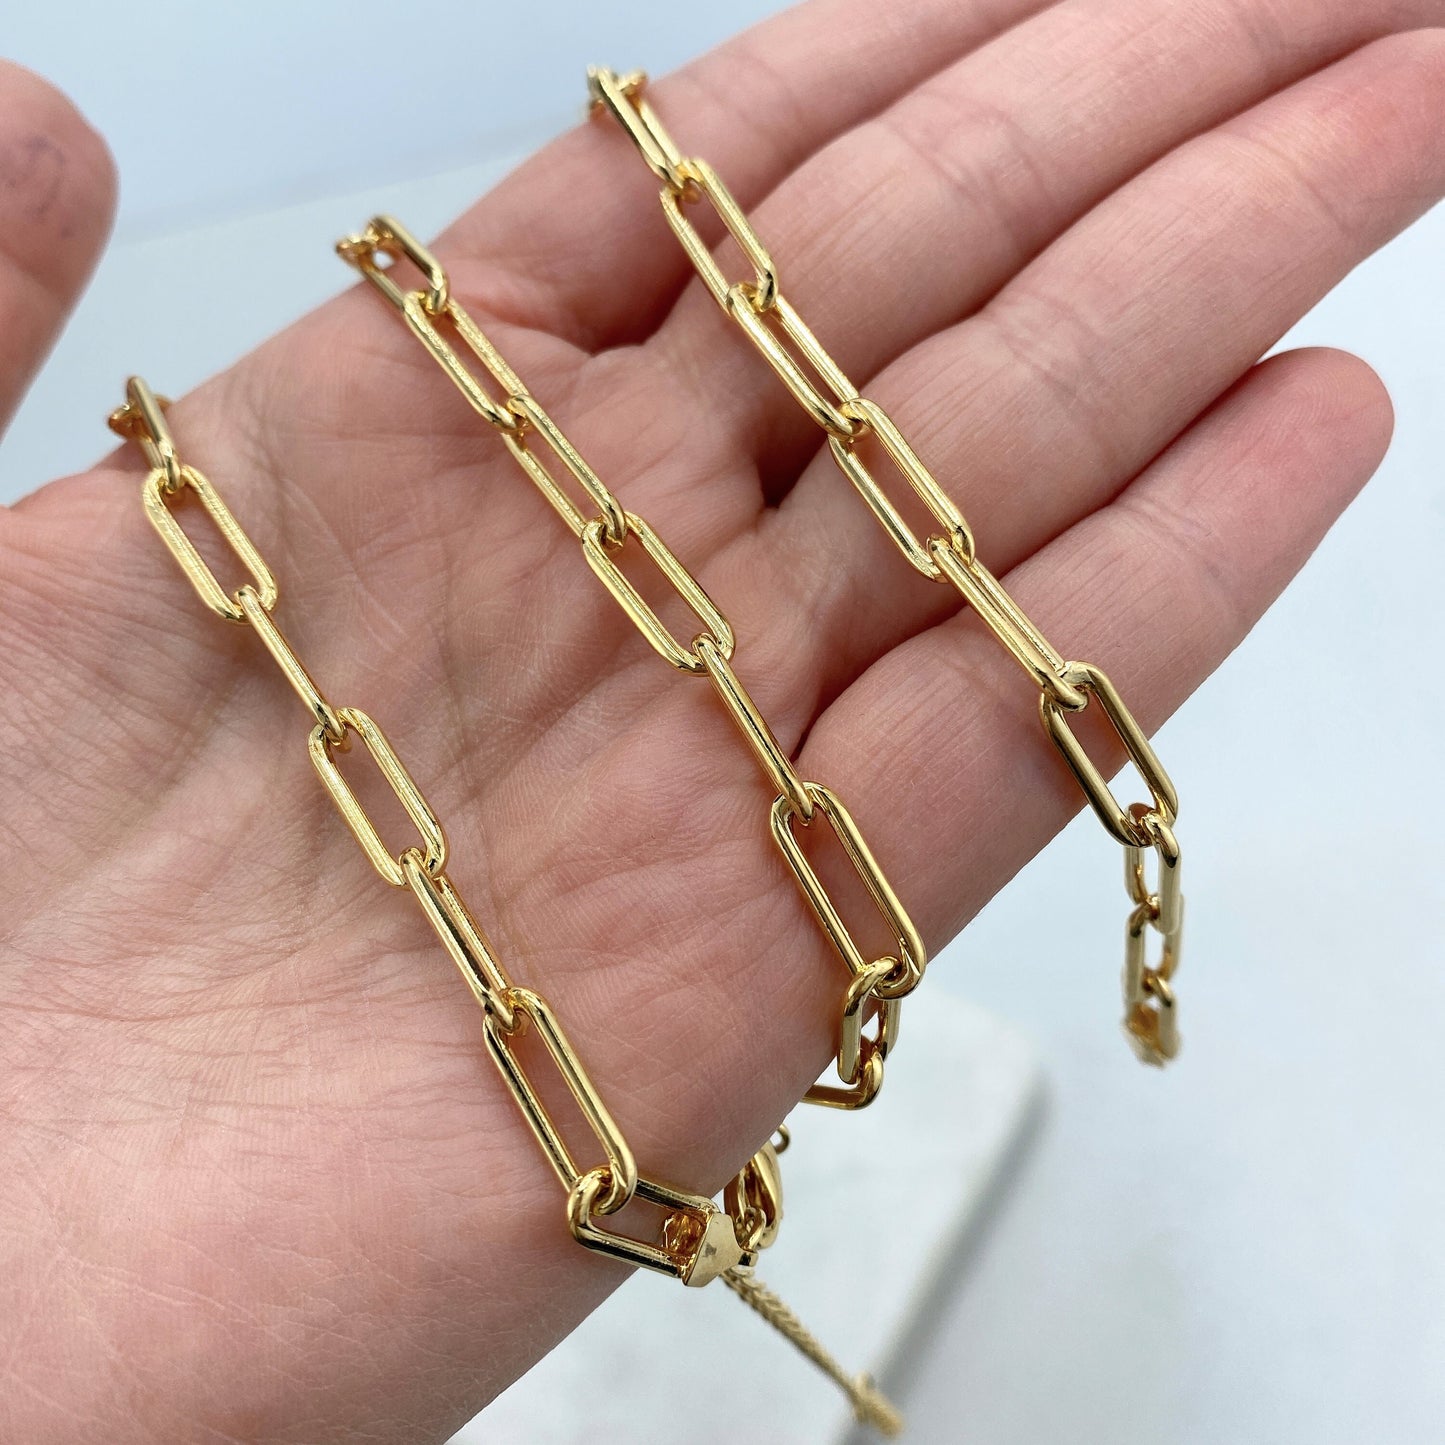 18k Gold Filled Paperclip Chain with Extender or Bracelet, Wholesale Jewelry Making Supplies